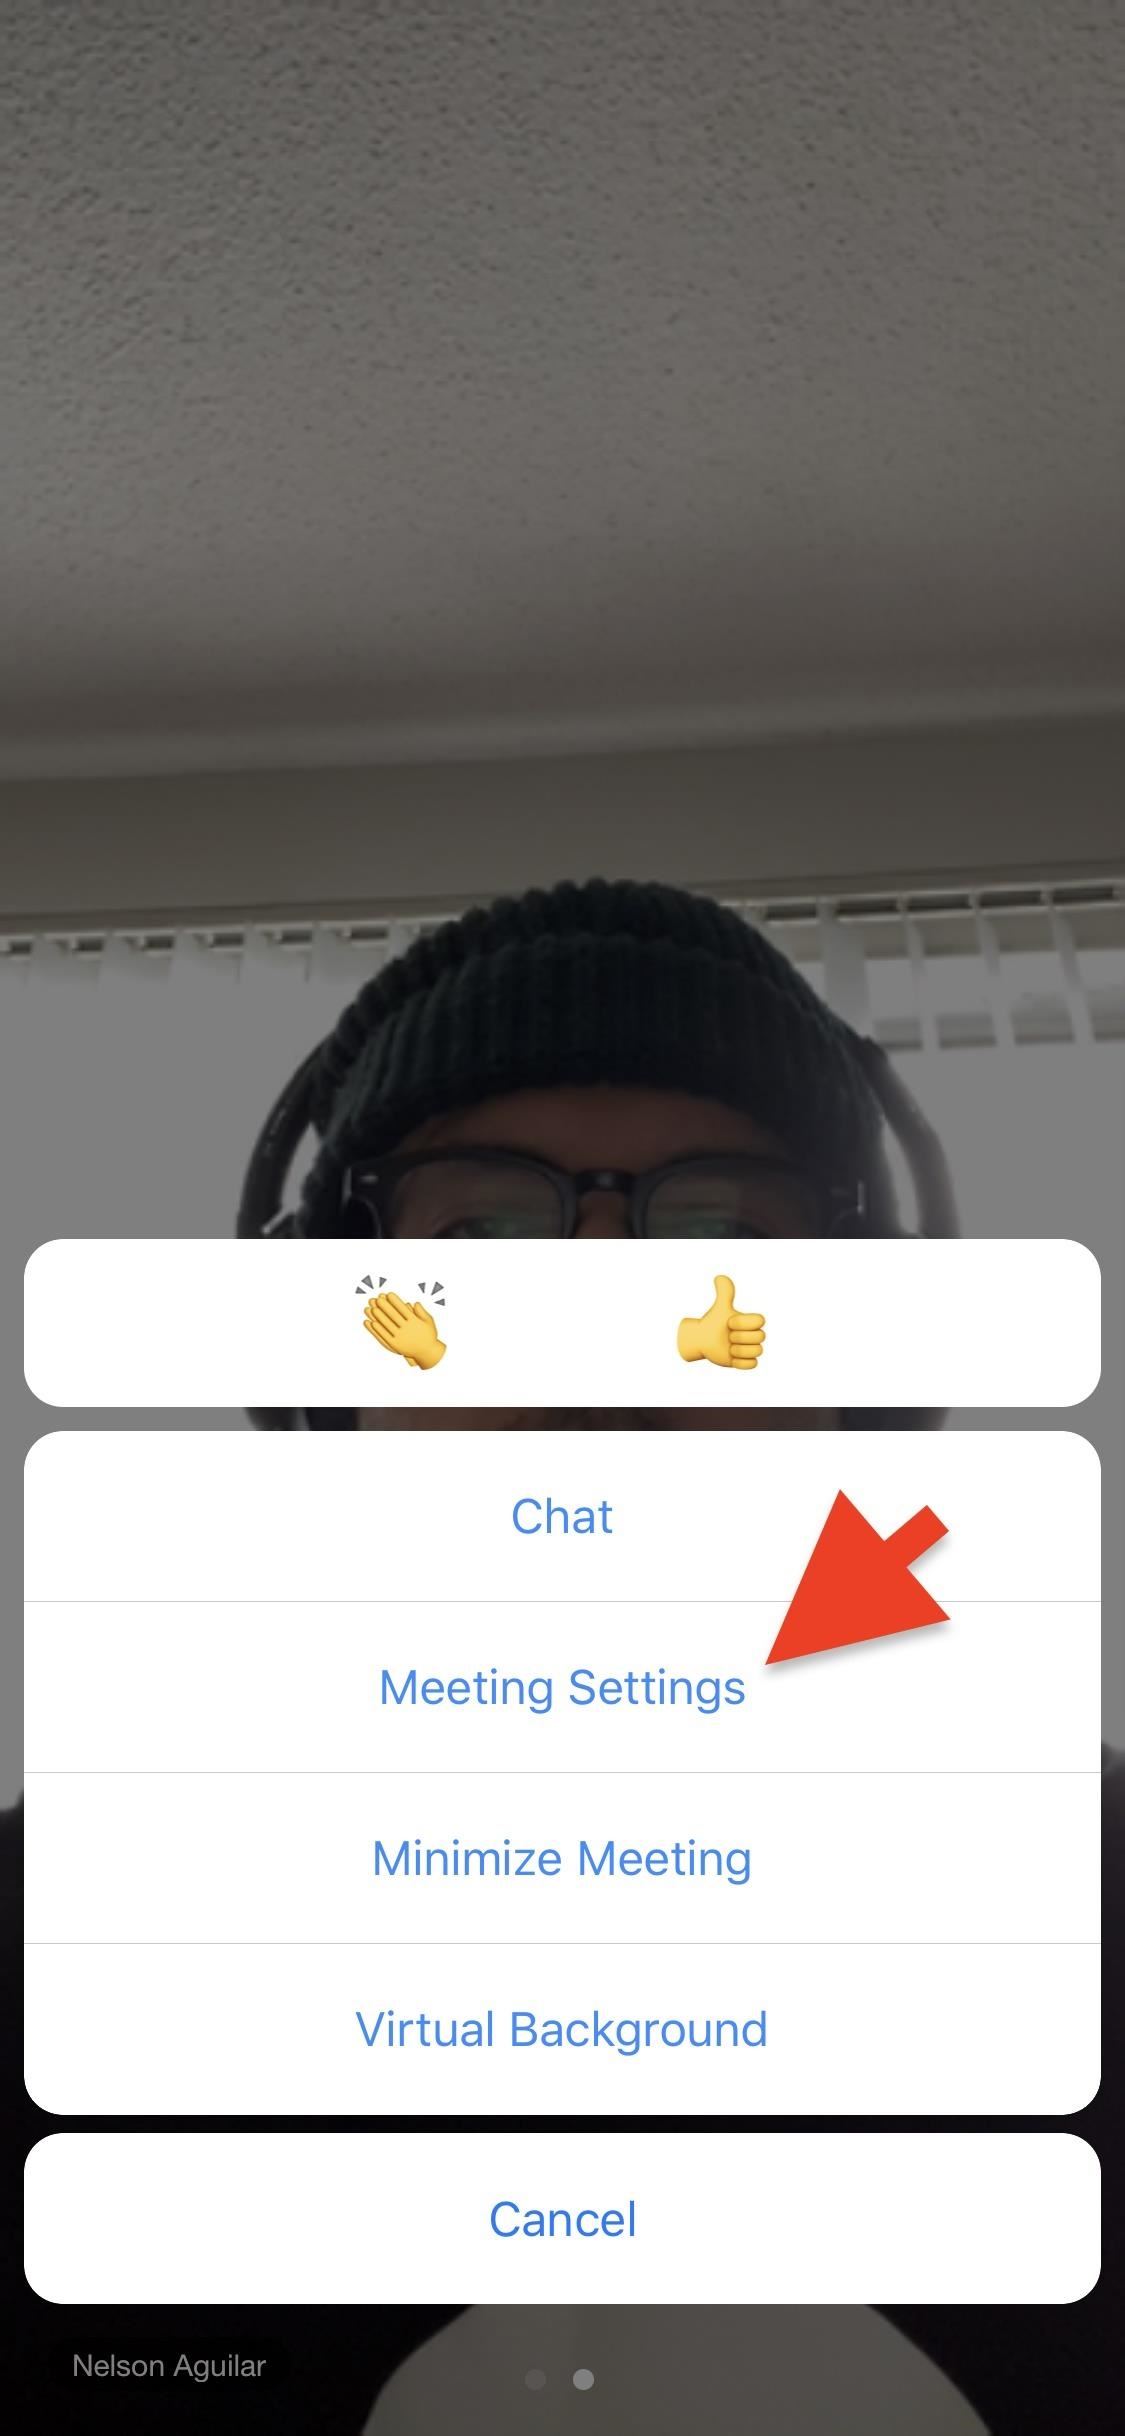 Disable Photo, Screen & URL Sharing for Participants on Zoom to Prevent Unwanted Images During Video Calls